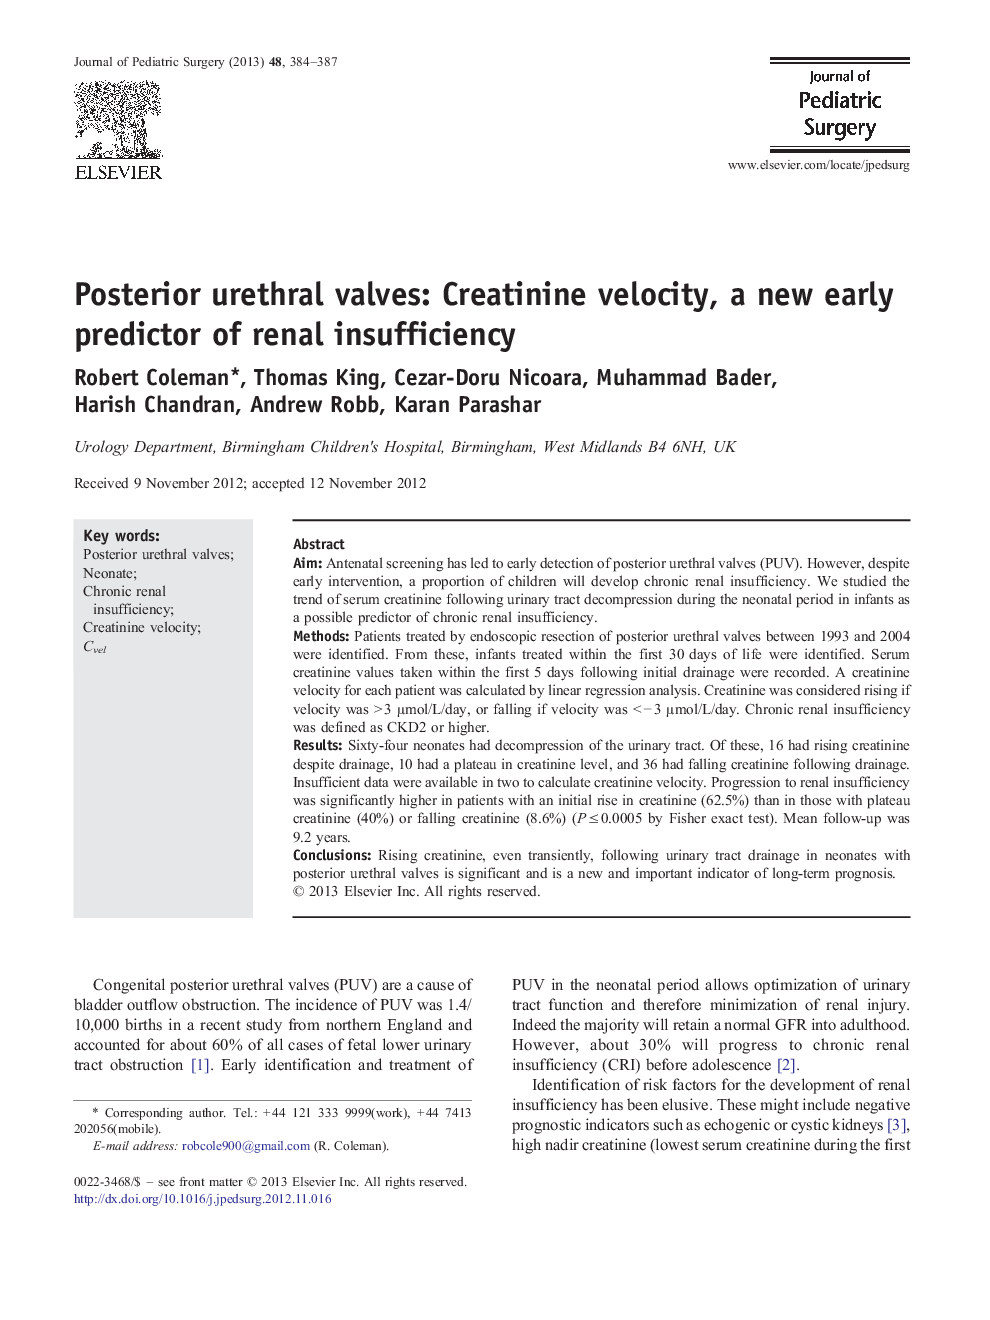 Posterior urethral valves: Creatinine velocity, a new early predictor of renal insufficiency